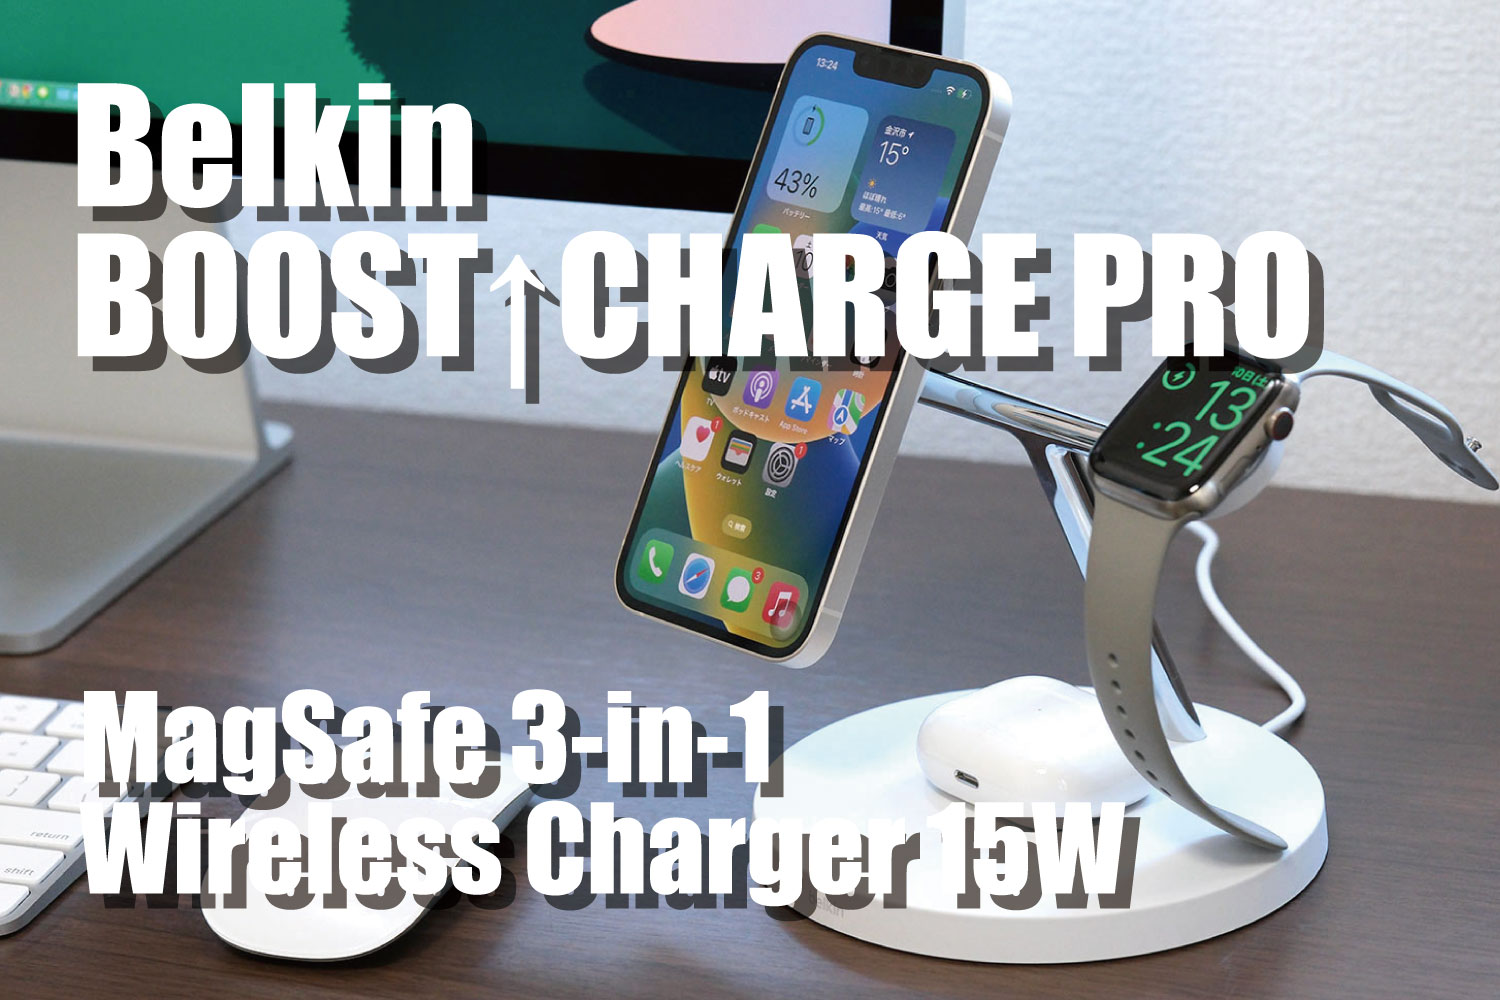 Belkin BOOST↑CHARGE PRO MagSafe 3-in-1 Wireless Charger 15W レビュー